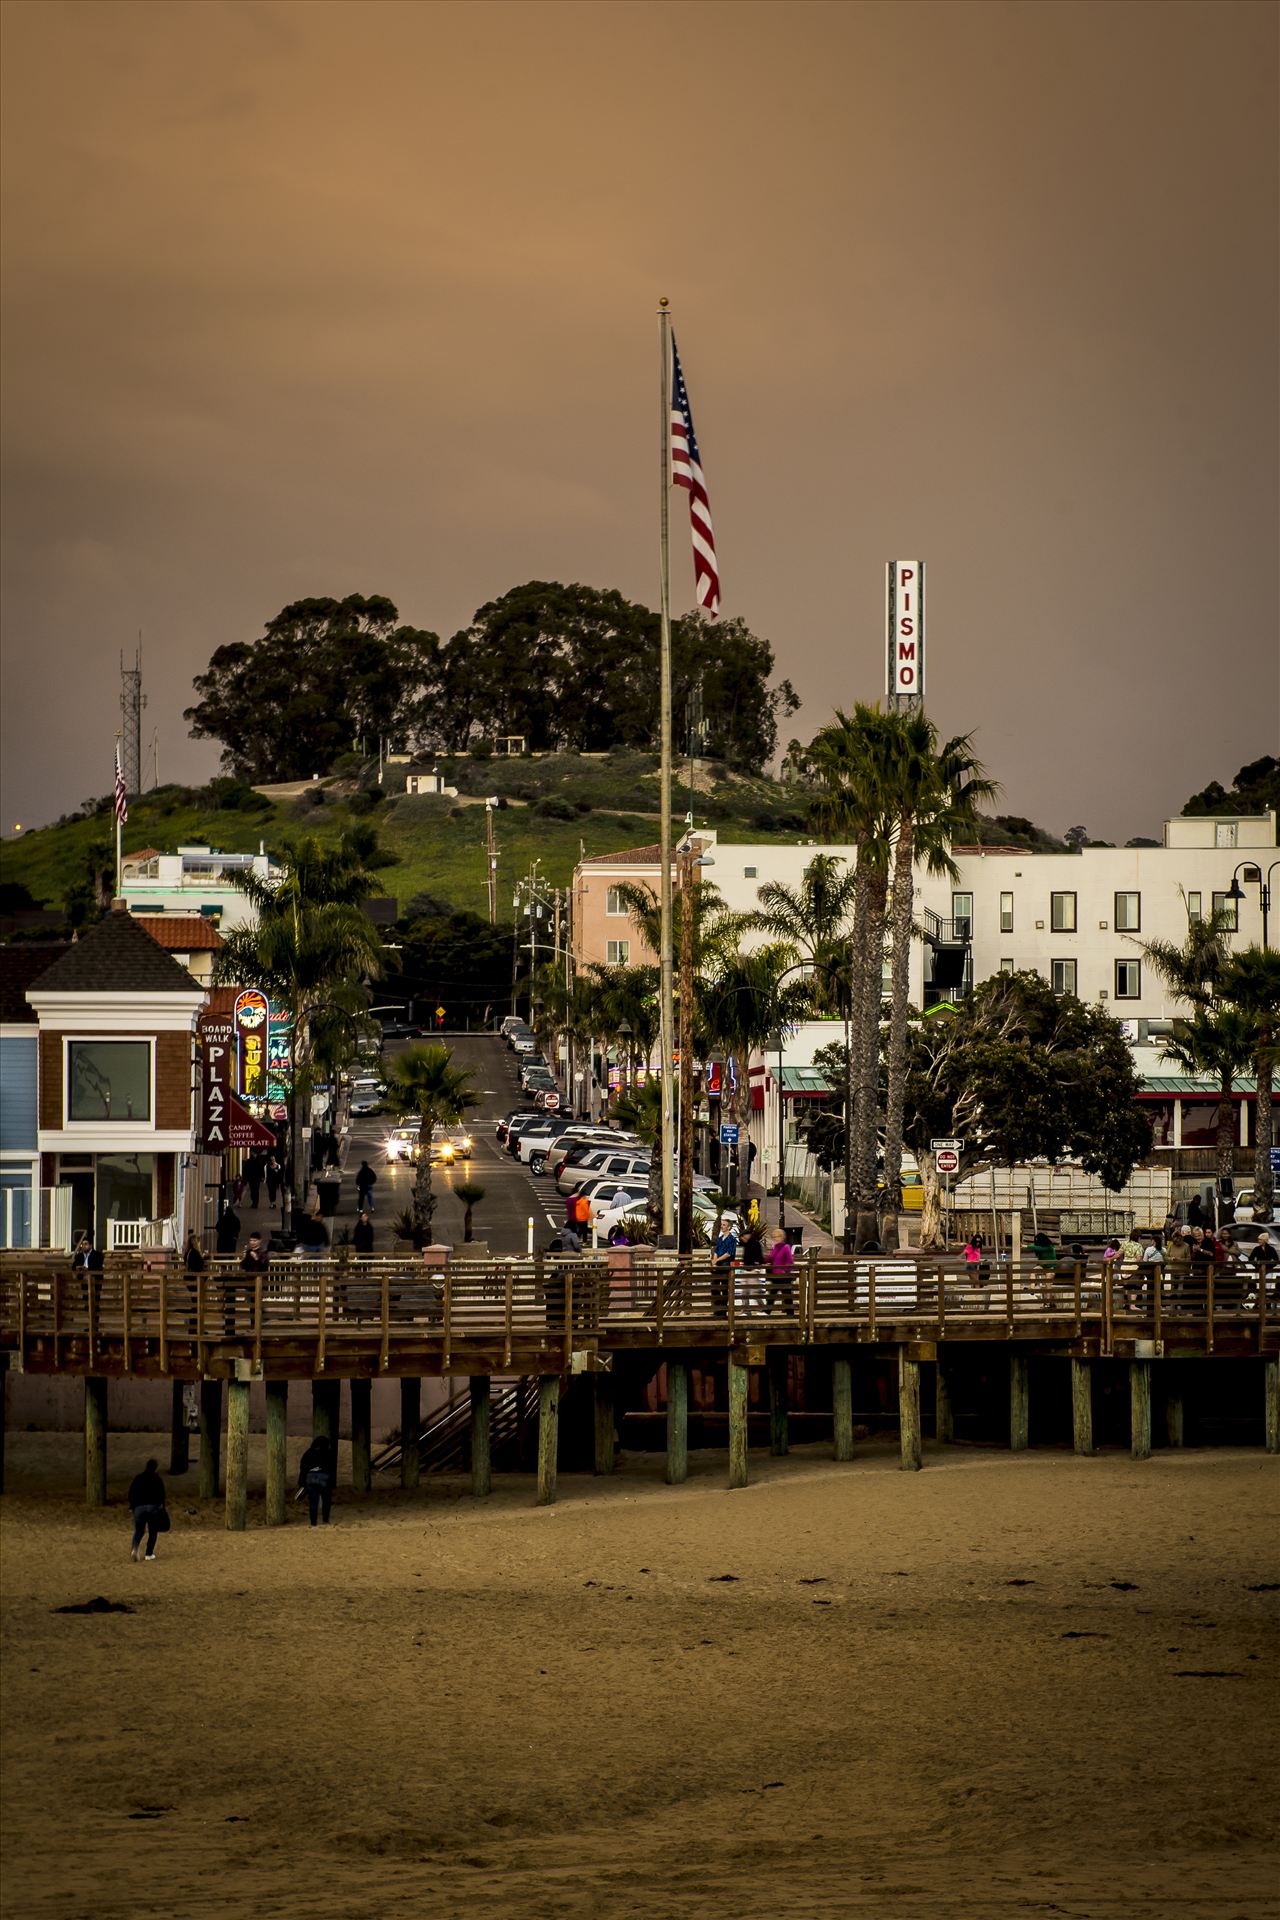 Stormy Downtown Pismo.jpg Stormy day in downtown Pismo Beach, California. by Sarah Williams